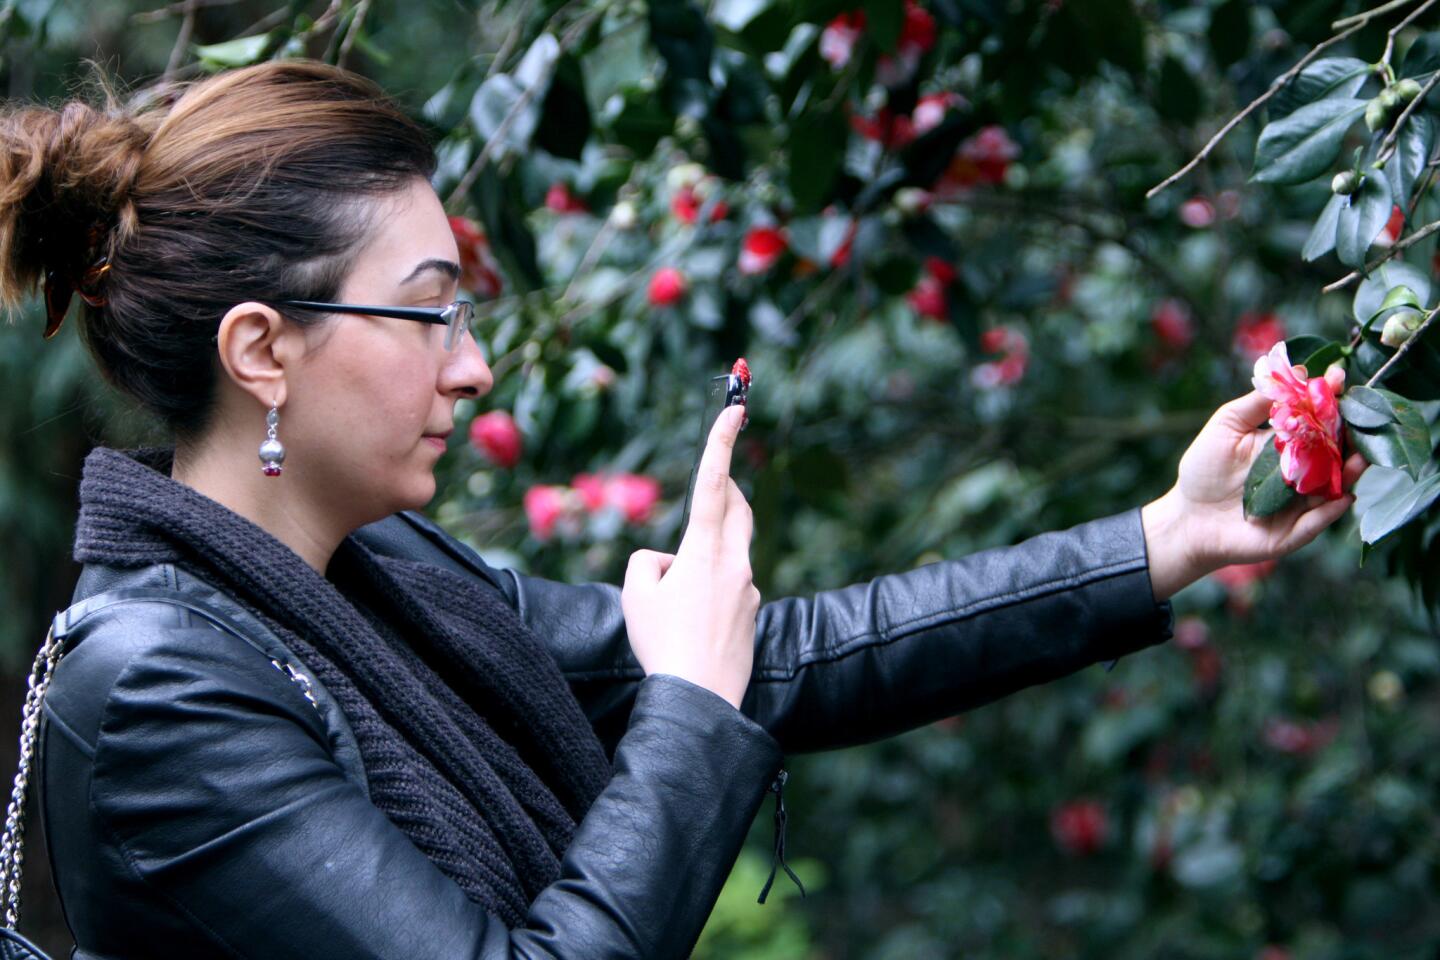 Ani Akobyan of Tujunga takes a photo of a Camellia japonica "Gigantea" during the annual Camellia Festival at Descanso Gardens in La Cañada Flintridge on Saturday, Feb. 11, 2017. The two-day festival includes tea tasting, performances and tours of the gardens.